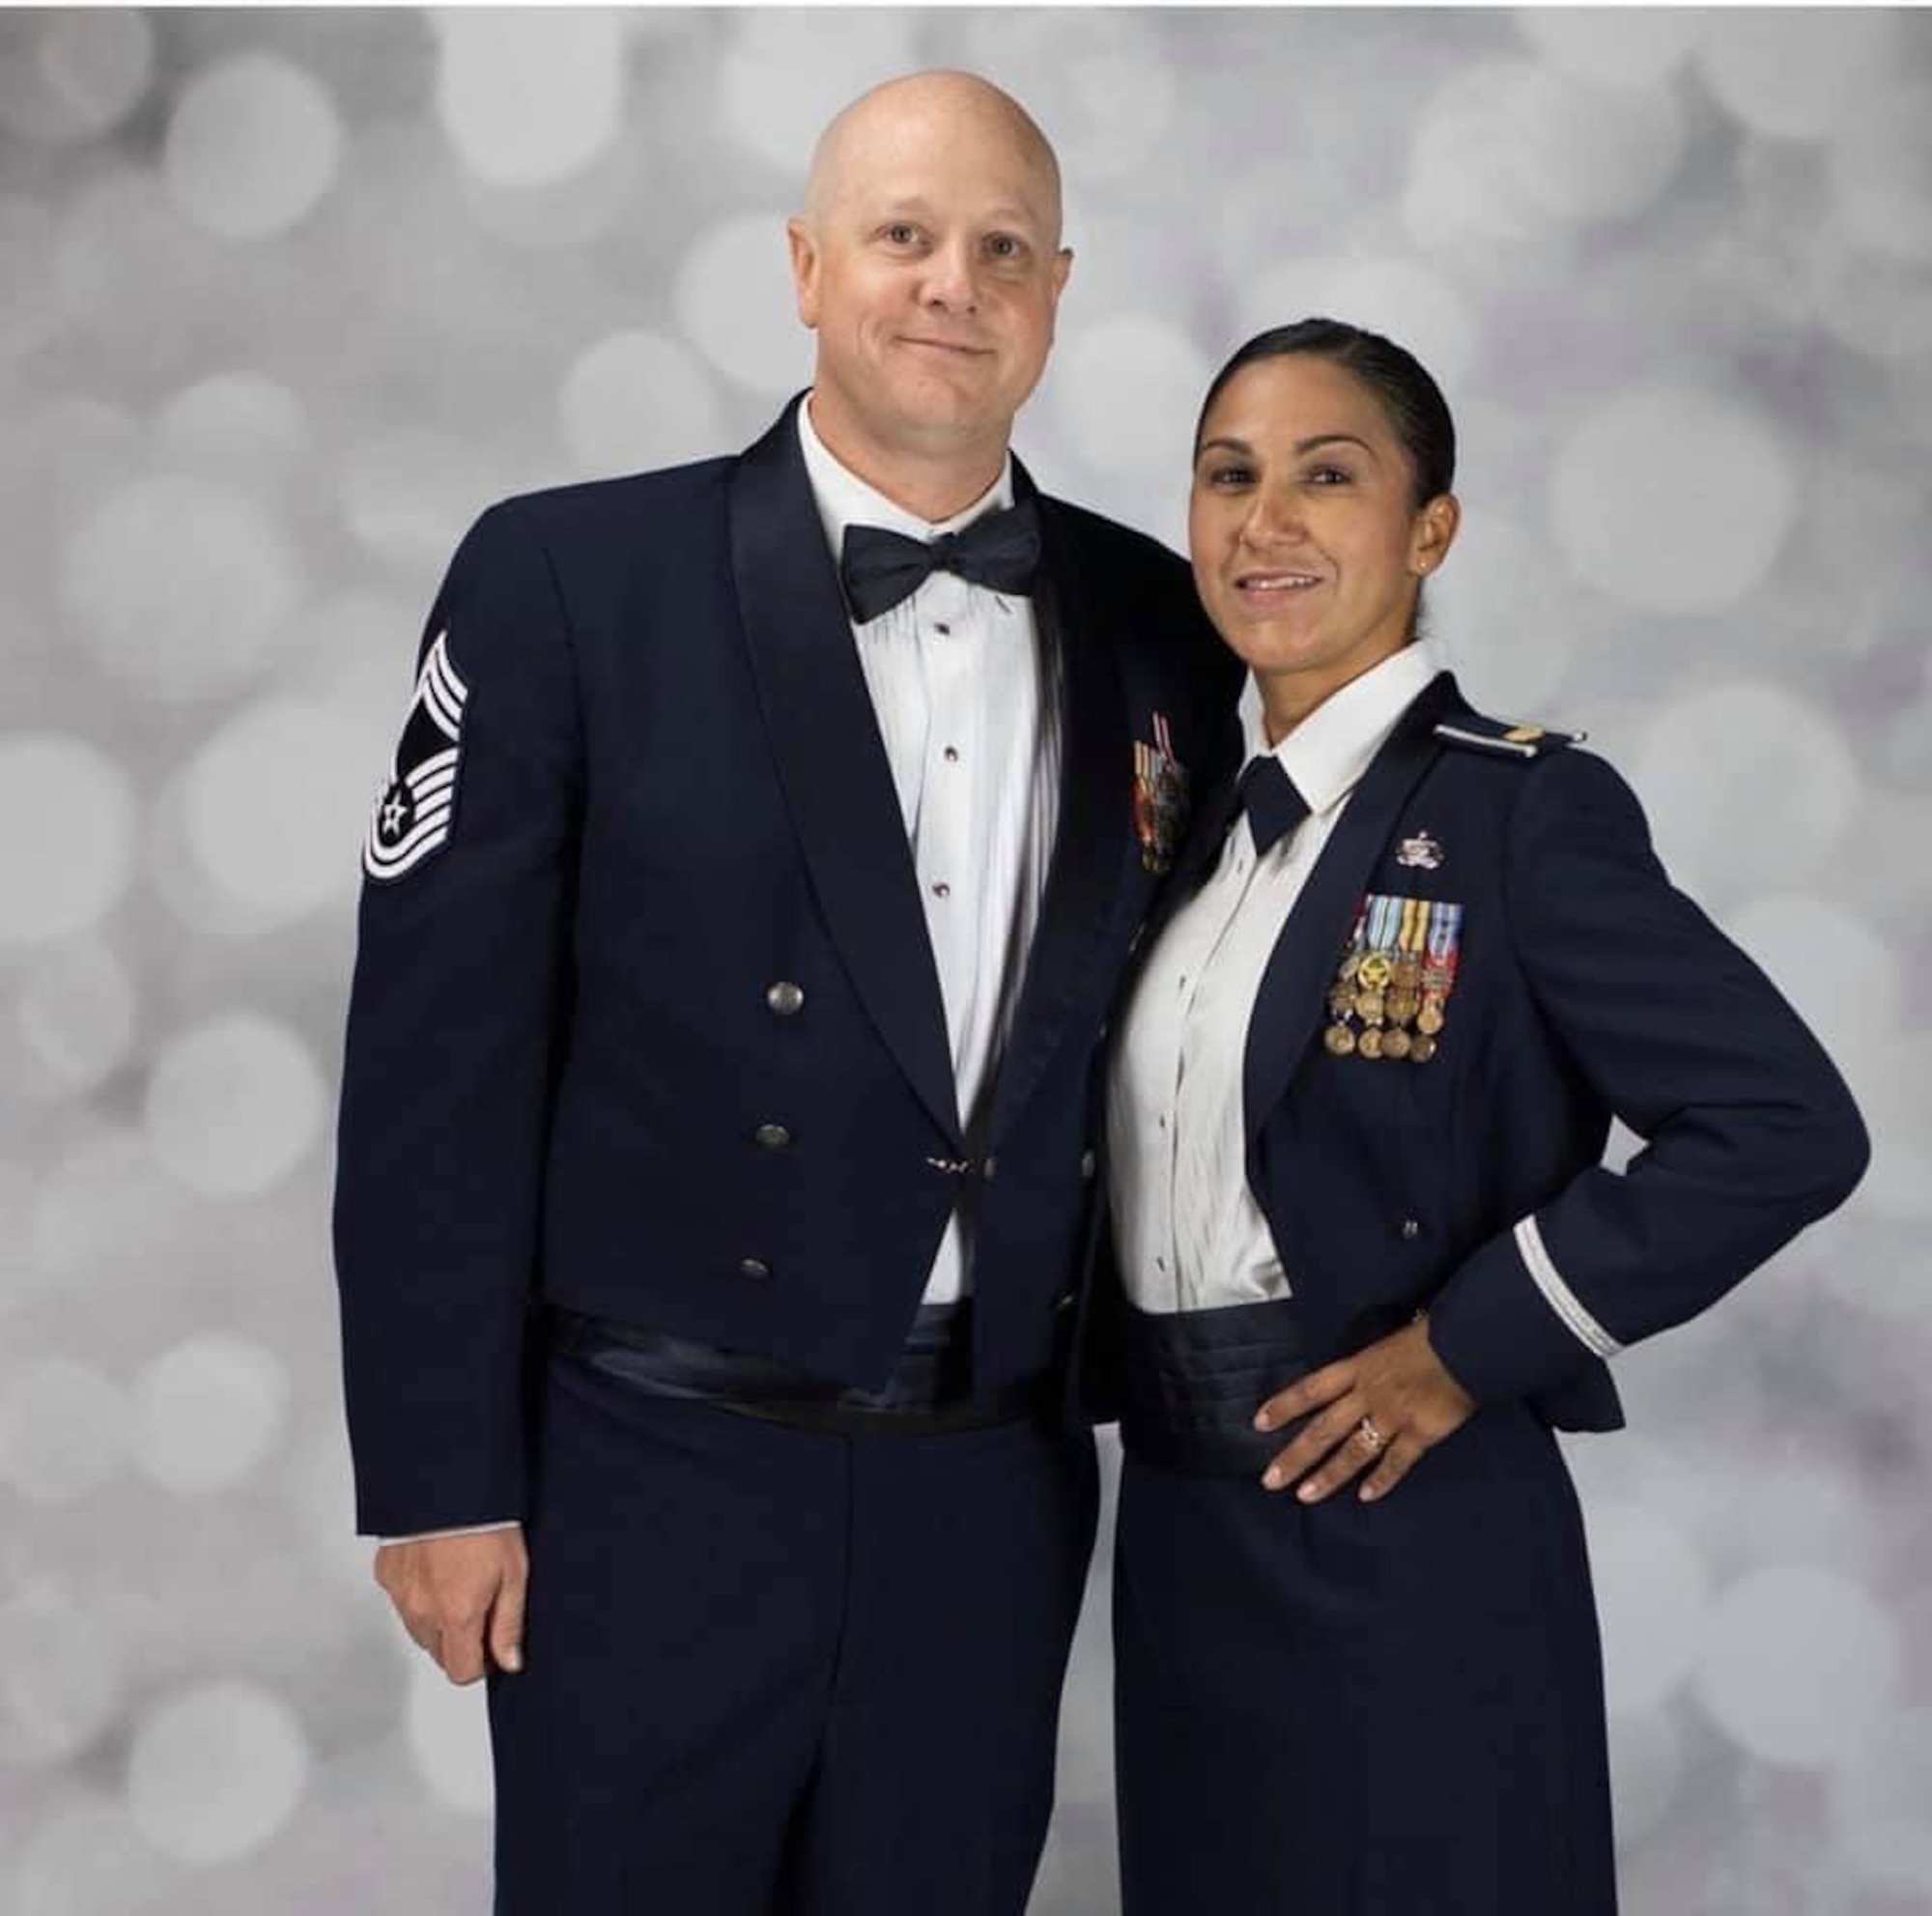 Chief Master Sgt. Michael Johnson, Air Force Recruiting Service chief of strategic marketing, poses with his wife, Lt. Col. Emilia Johnson, Air Force Personnel Center assignment program development chief, at the Air Force Ball in 2019.